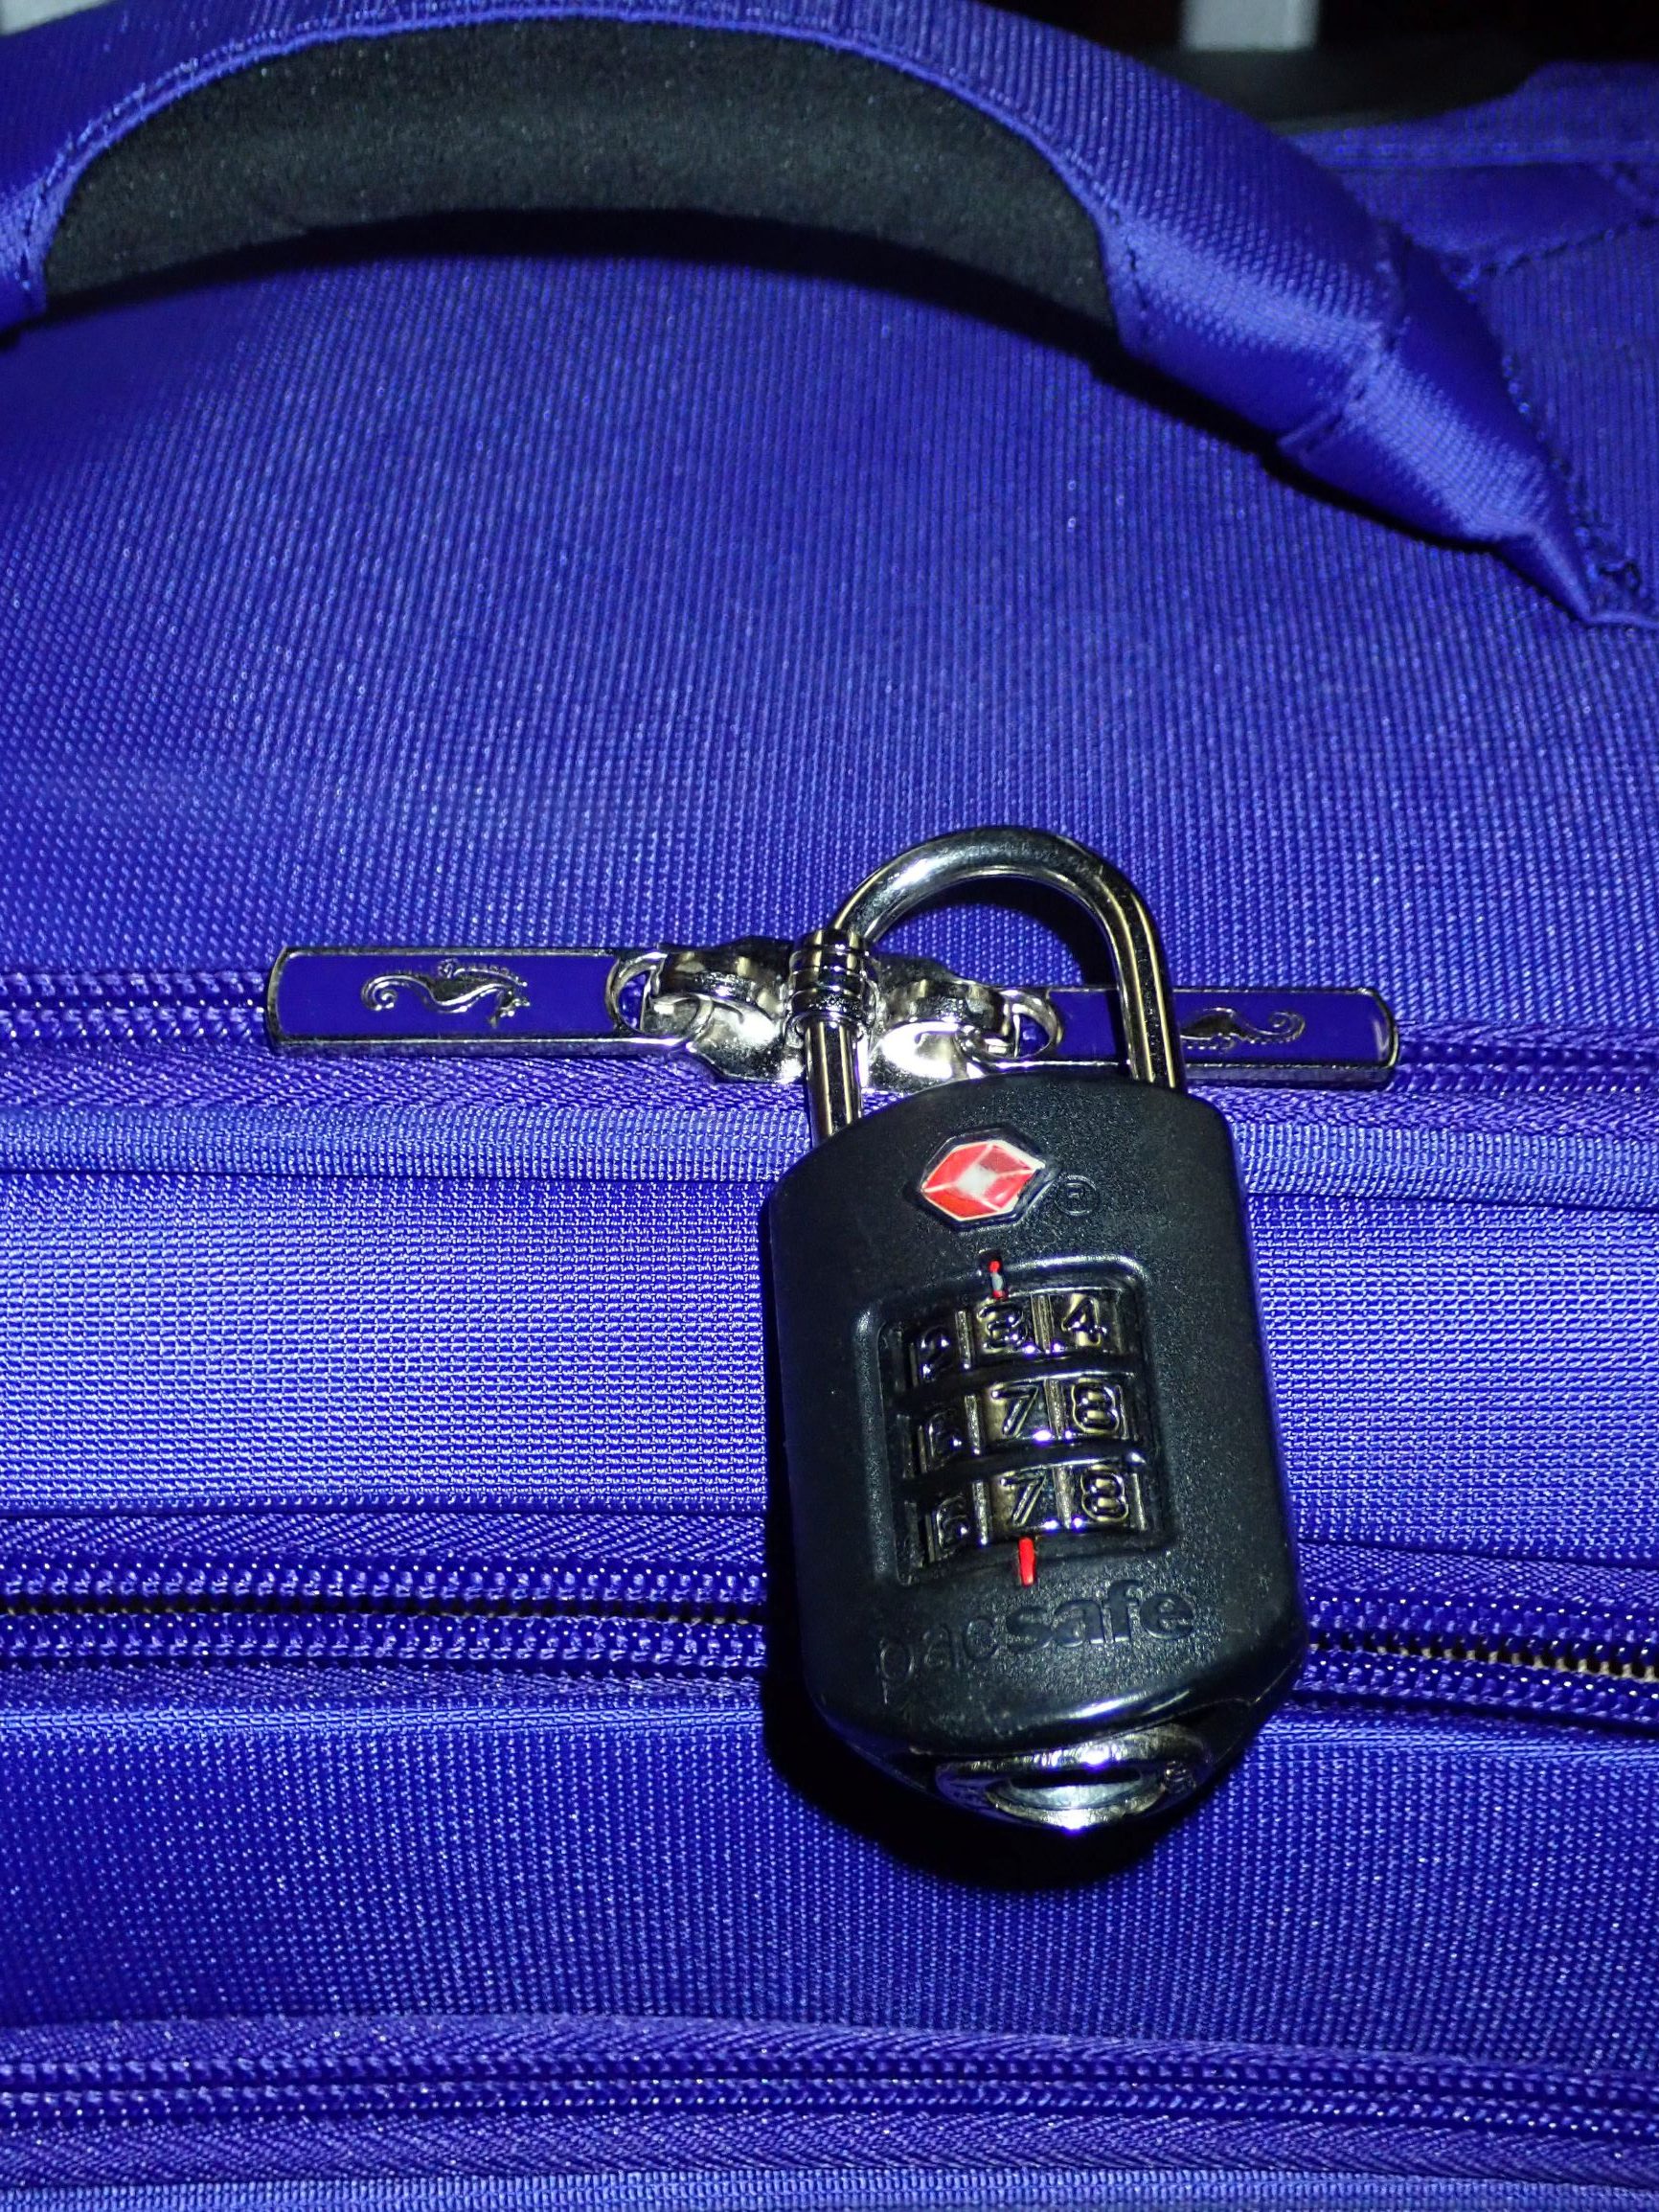 TSA approved luggage locks are a must-have item for travelers